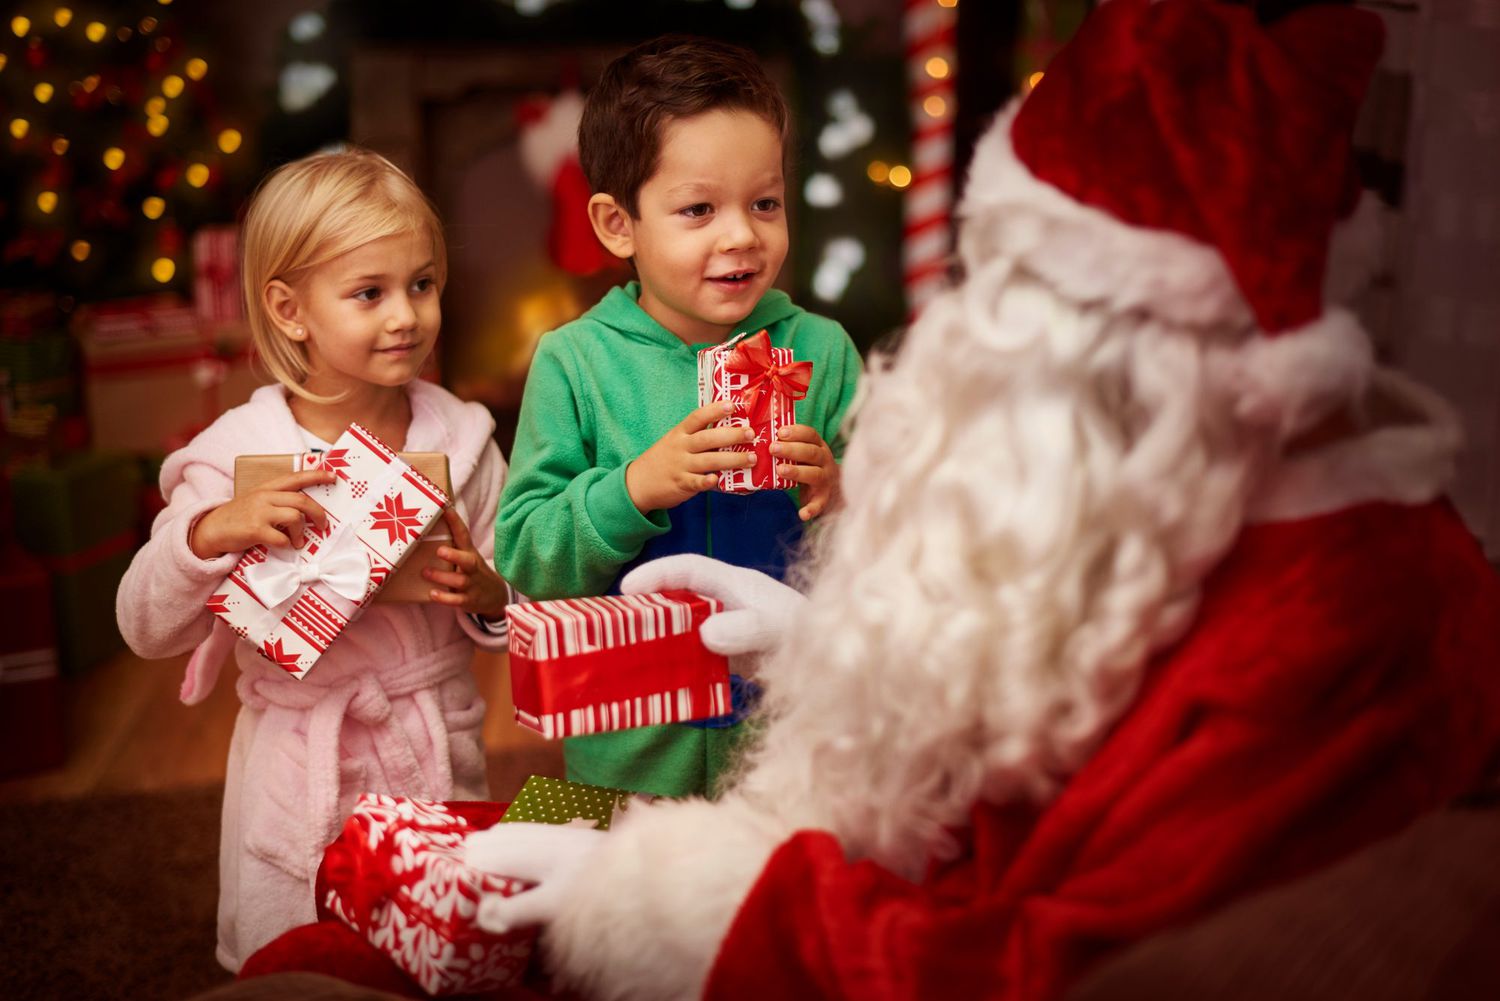 Operation Santa Lets You Grant Holiday Wishes for Kids in Need